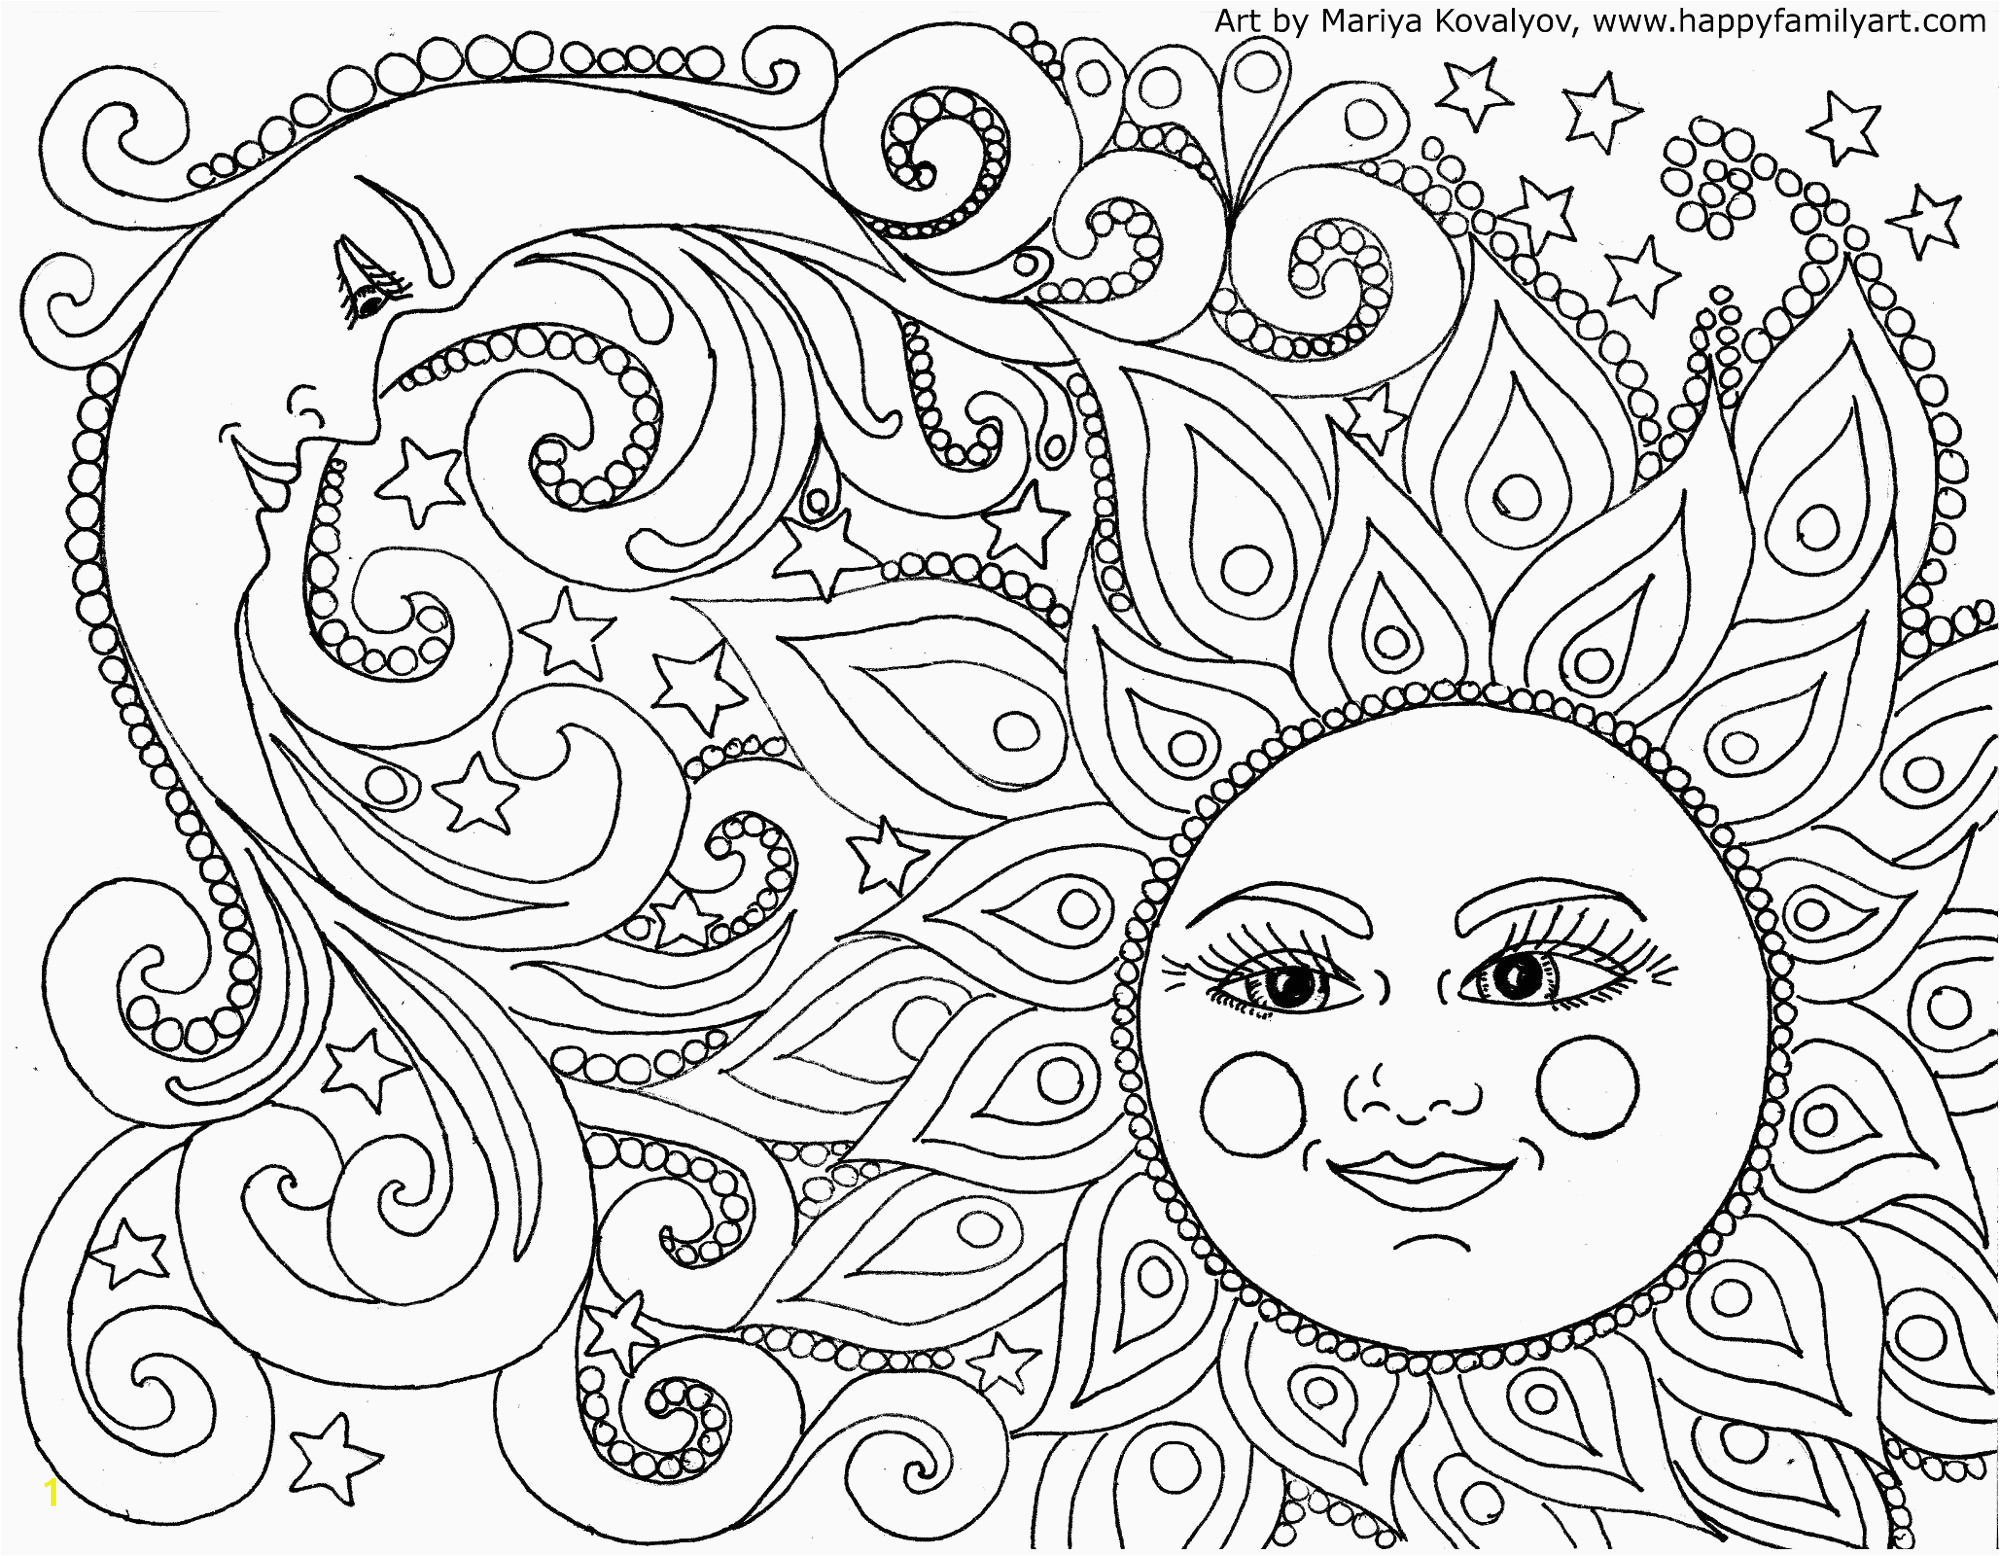 Finished Coloring Pages for Adults 17 Inspirational What to Do with Finished Coloring Pages